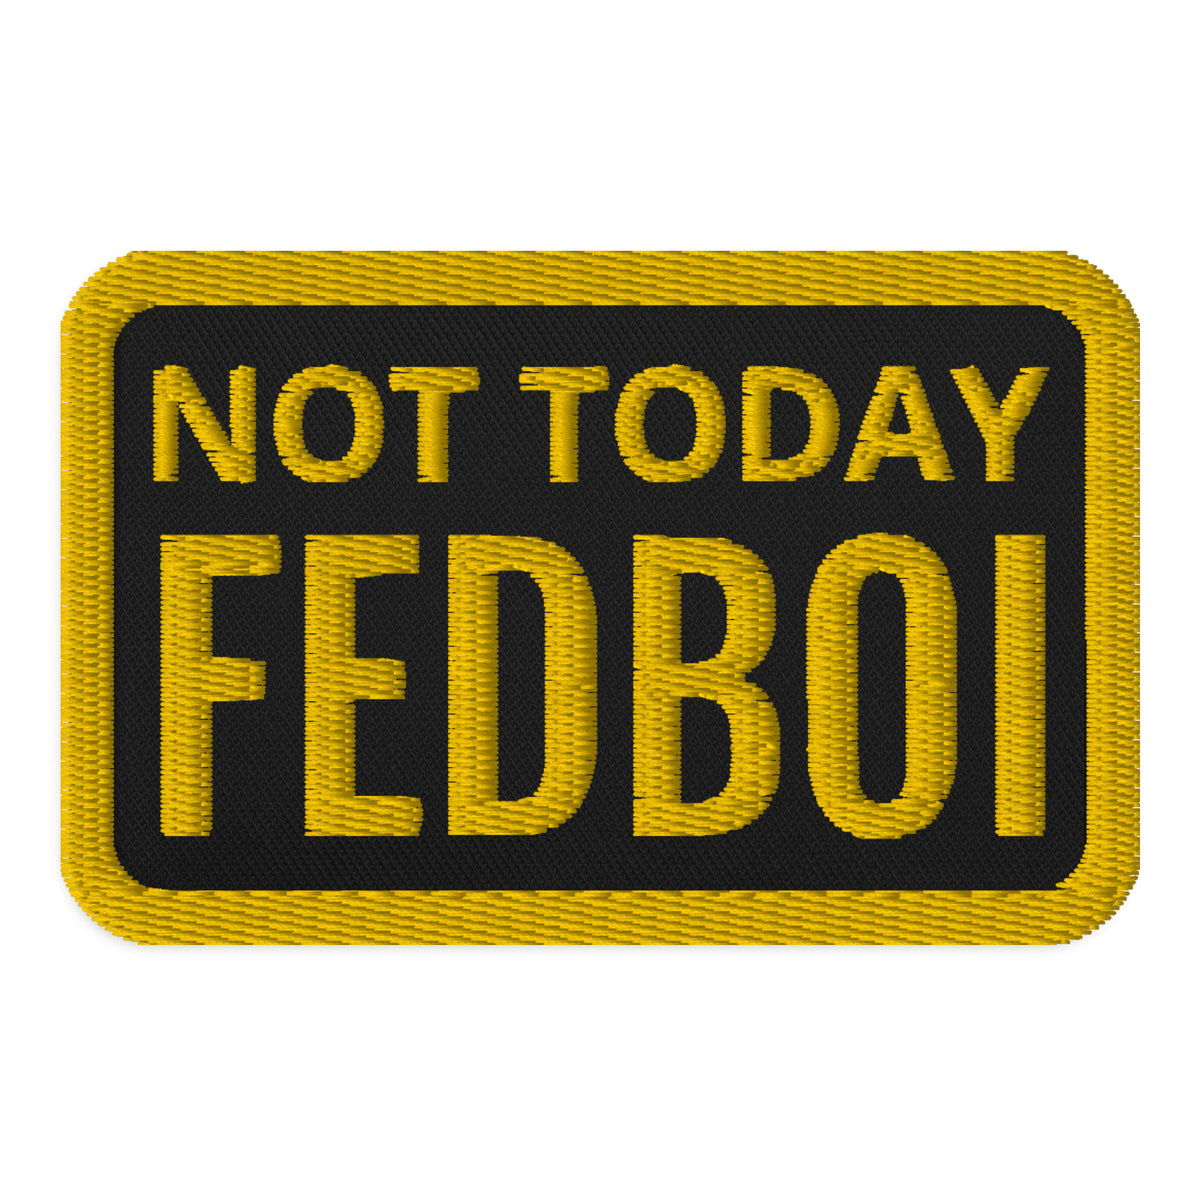 Not Today Fedboi Embroidered Morale Patch